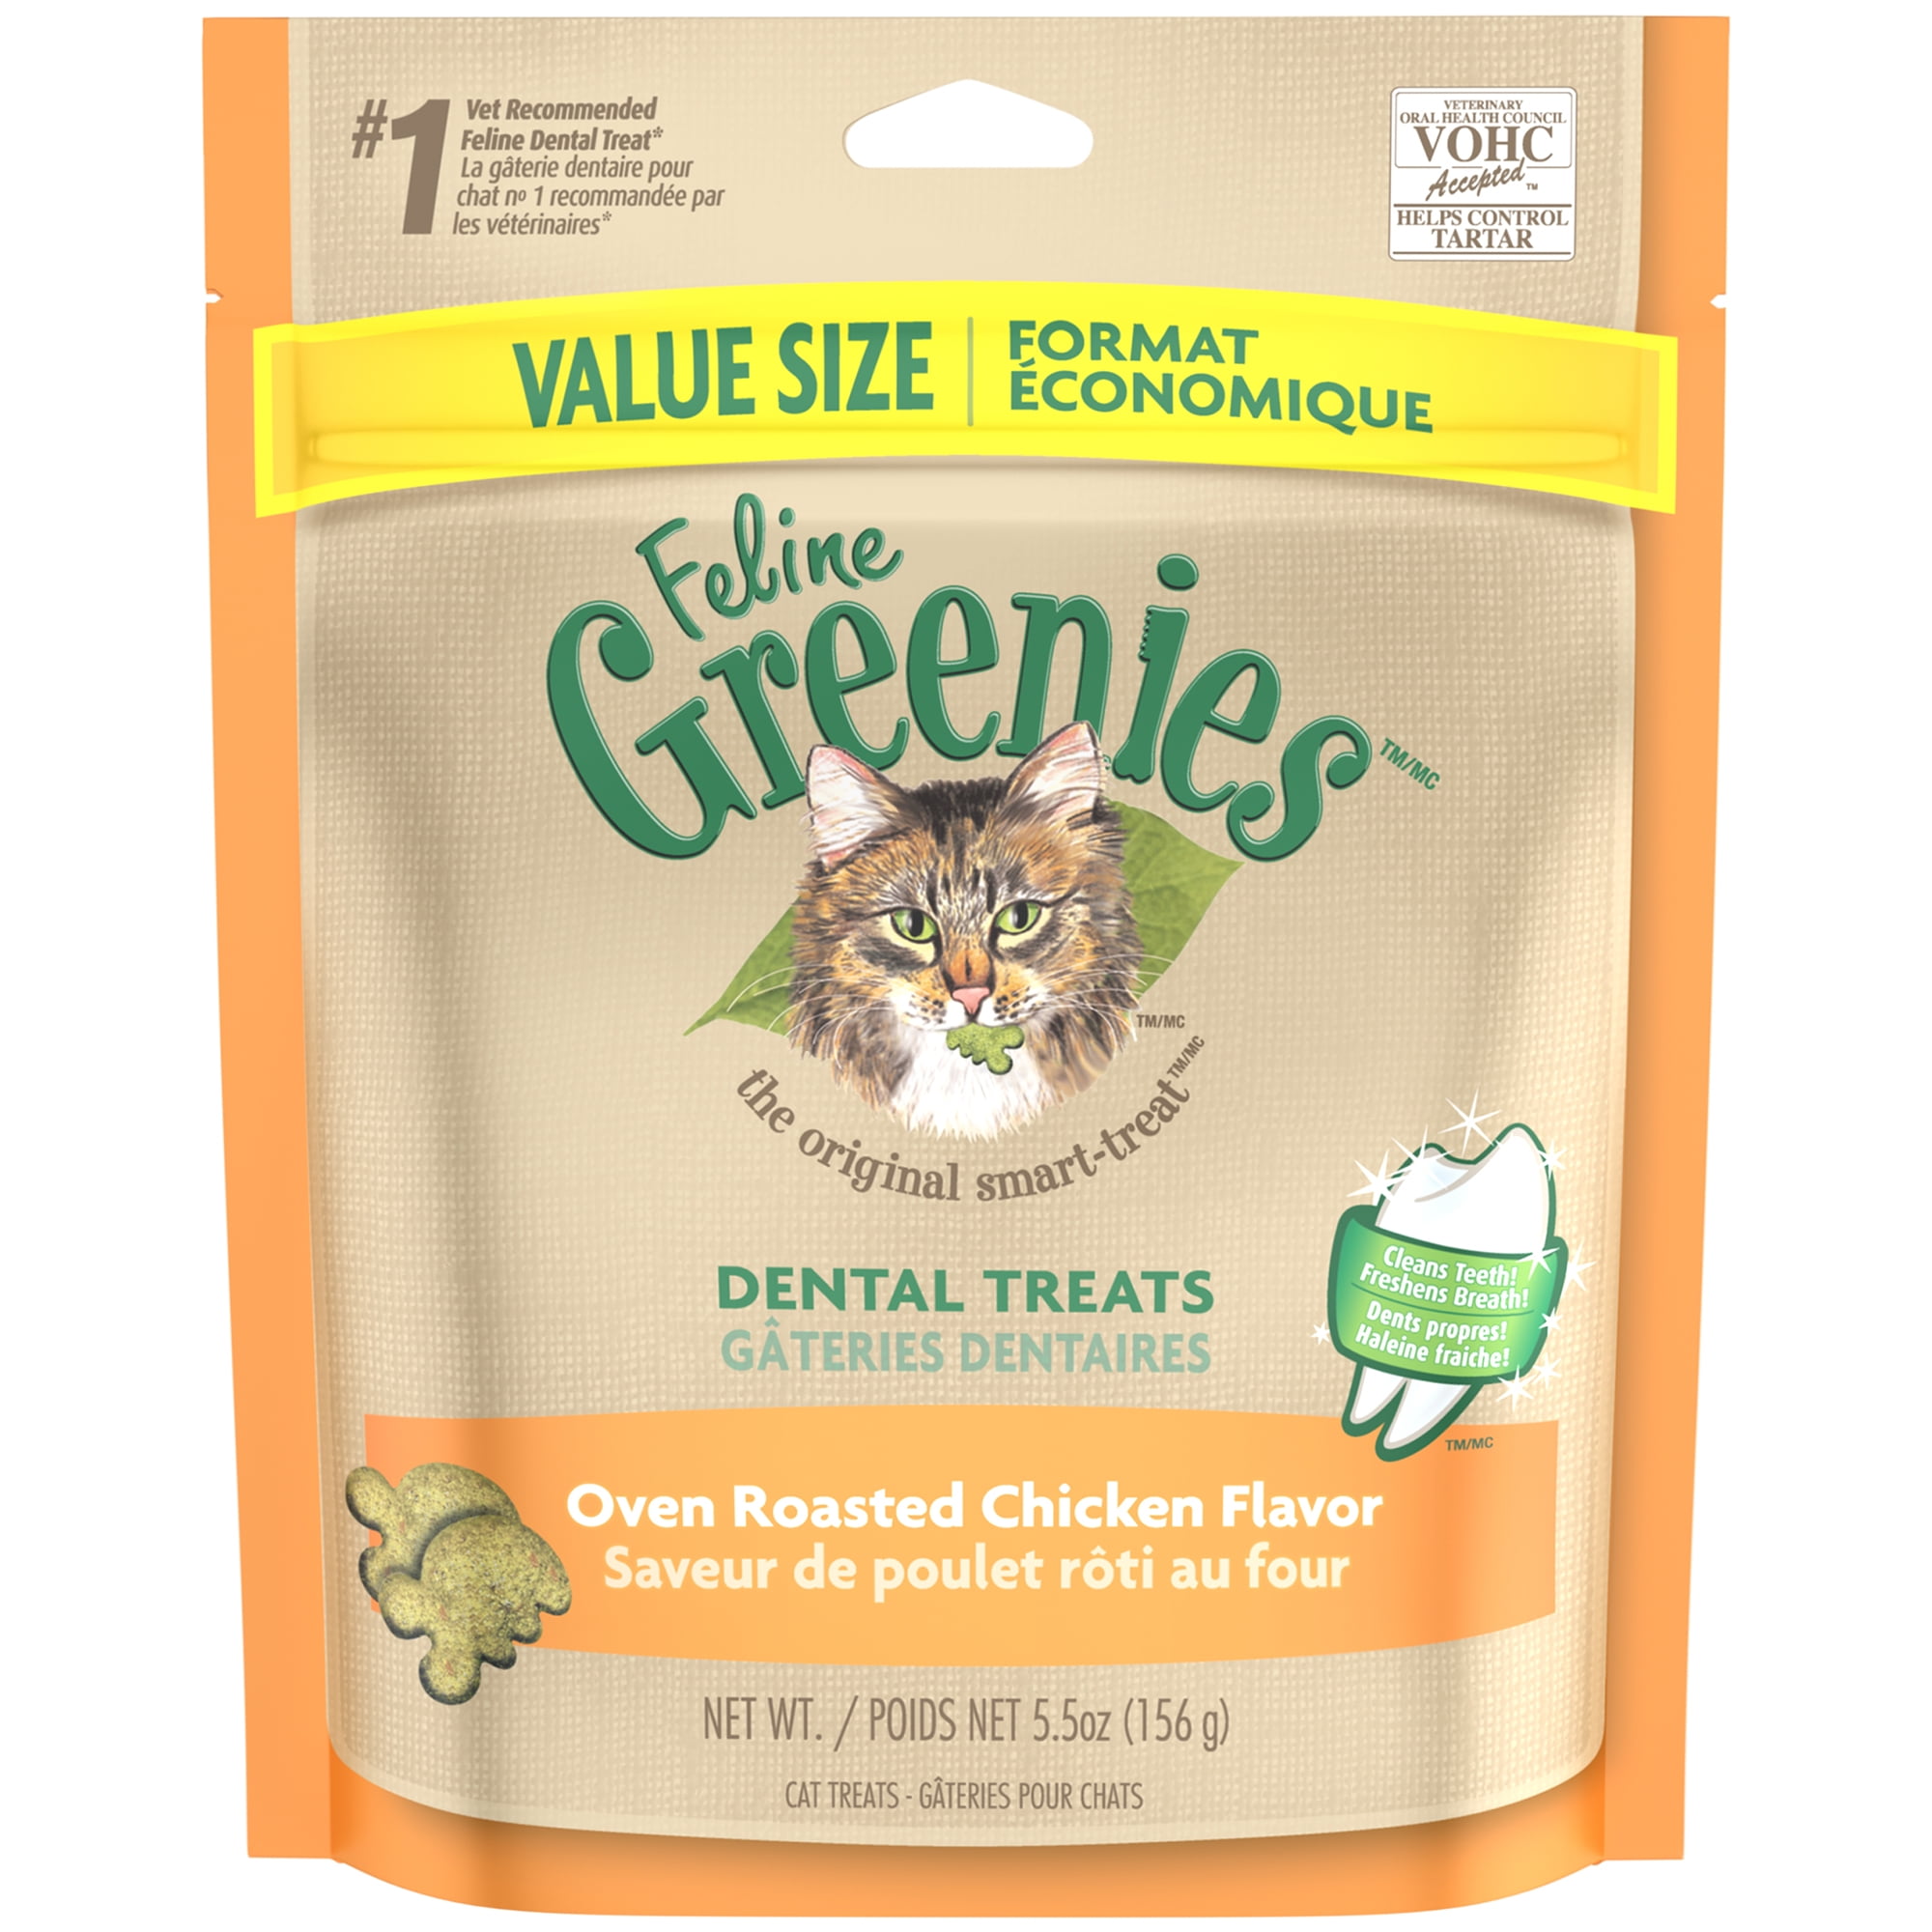 Pouch FELINE GREENIES Natural Dental Care Cat Treats Oven Roasted Chicken Flavor 2.5 oz